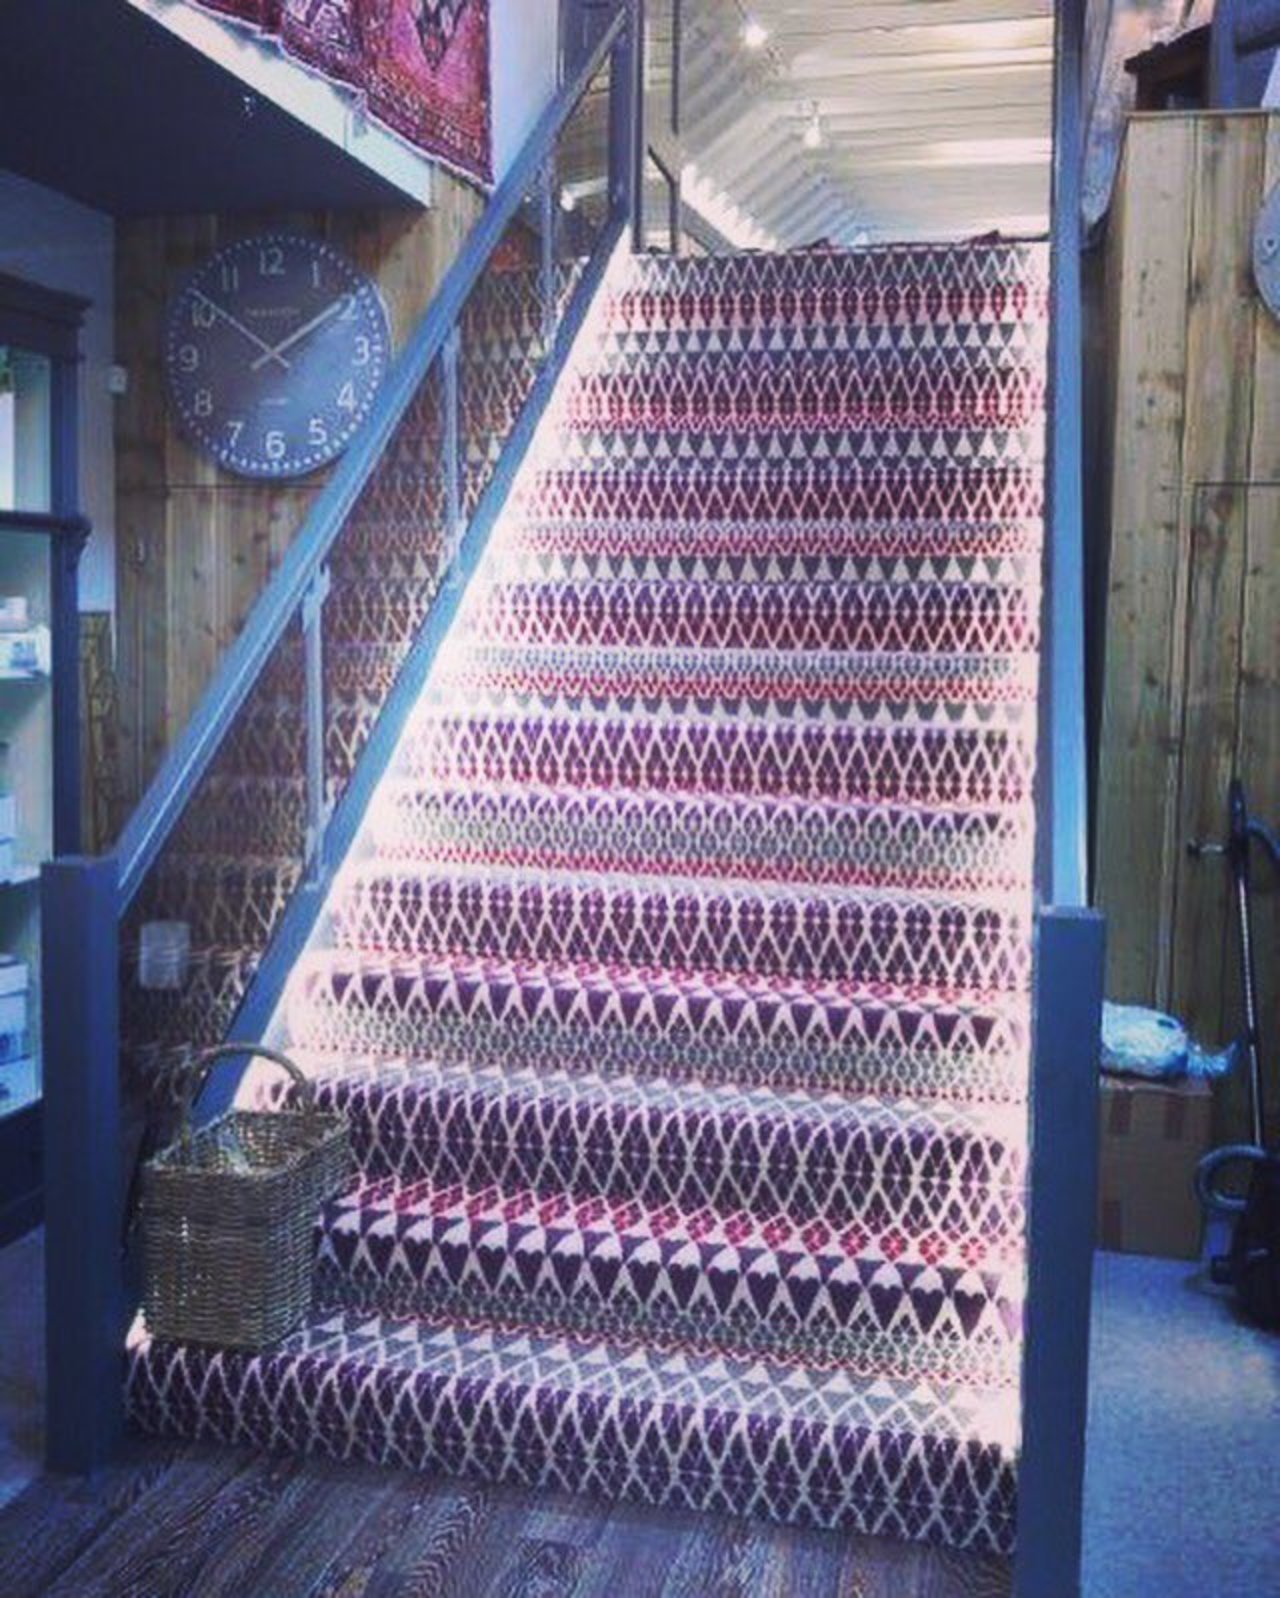 Manse Furnishings are lighting the way with this stunning #staircase in our #quirkyb Fair Isle Reiko by @margoselby https://t.co/NQbBQz6uv5